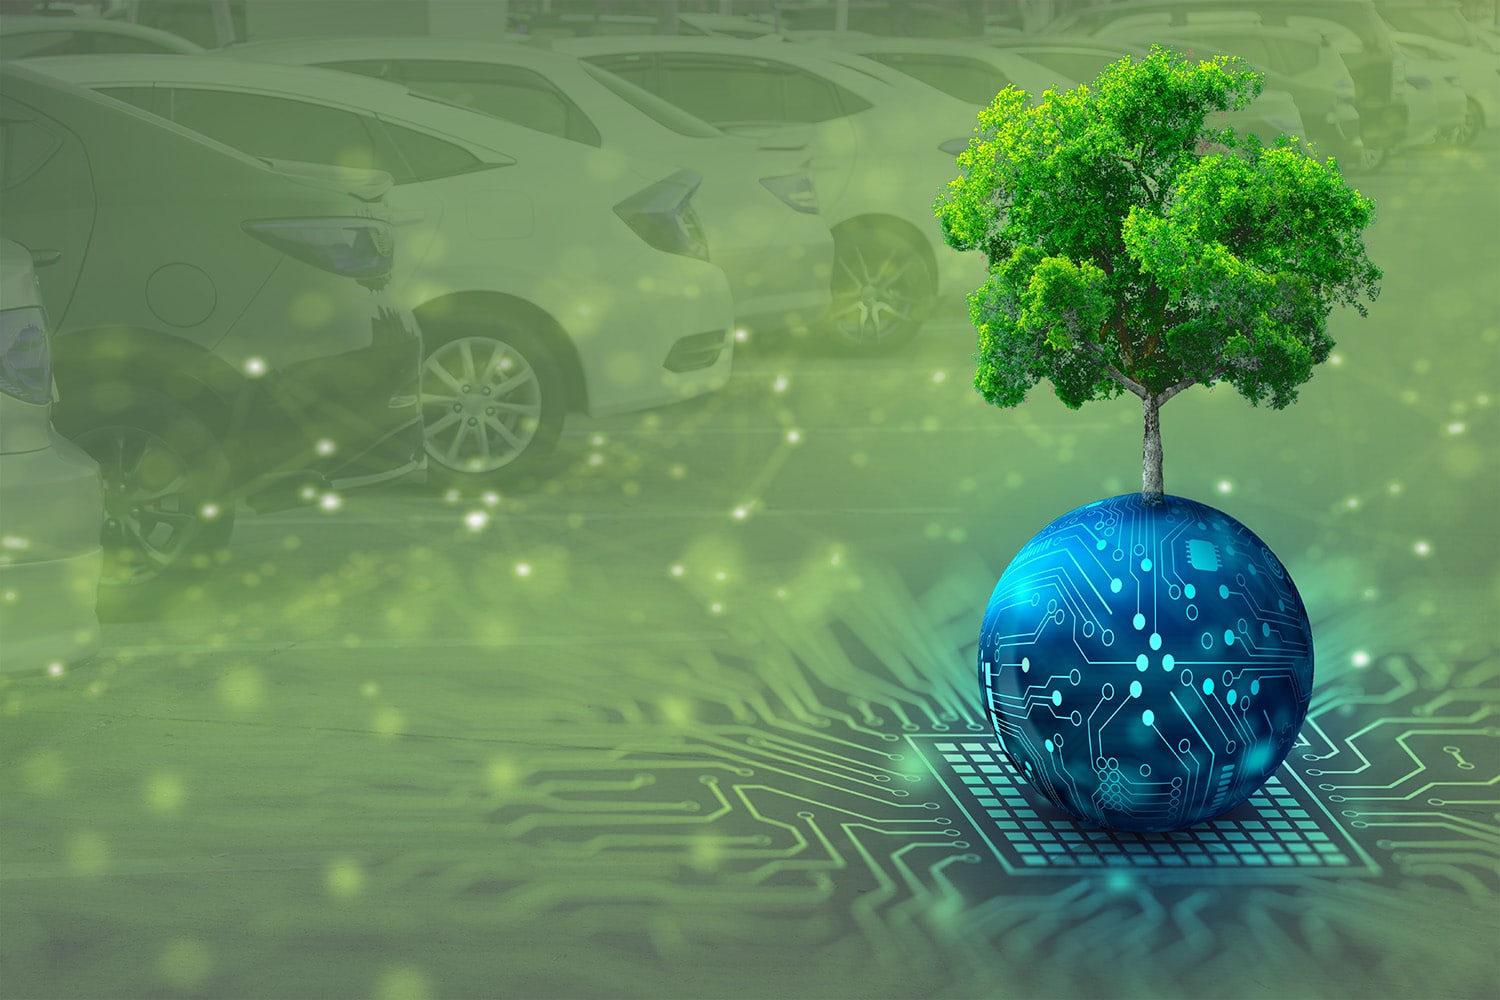 A tree grows on top of a circuit board amidst cars in a parking lot.